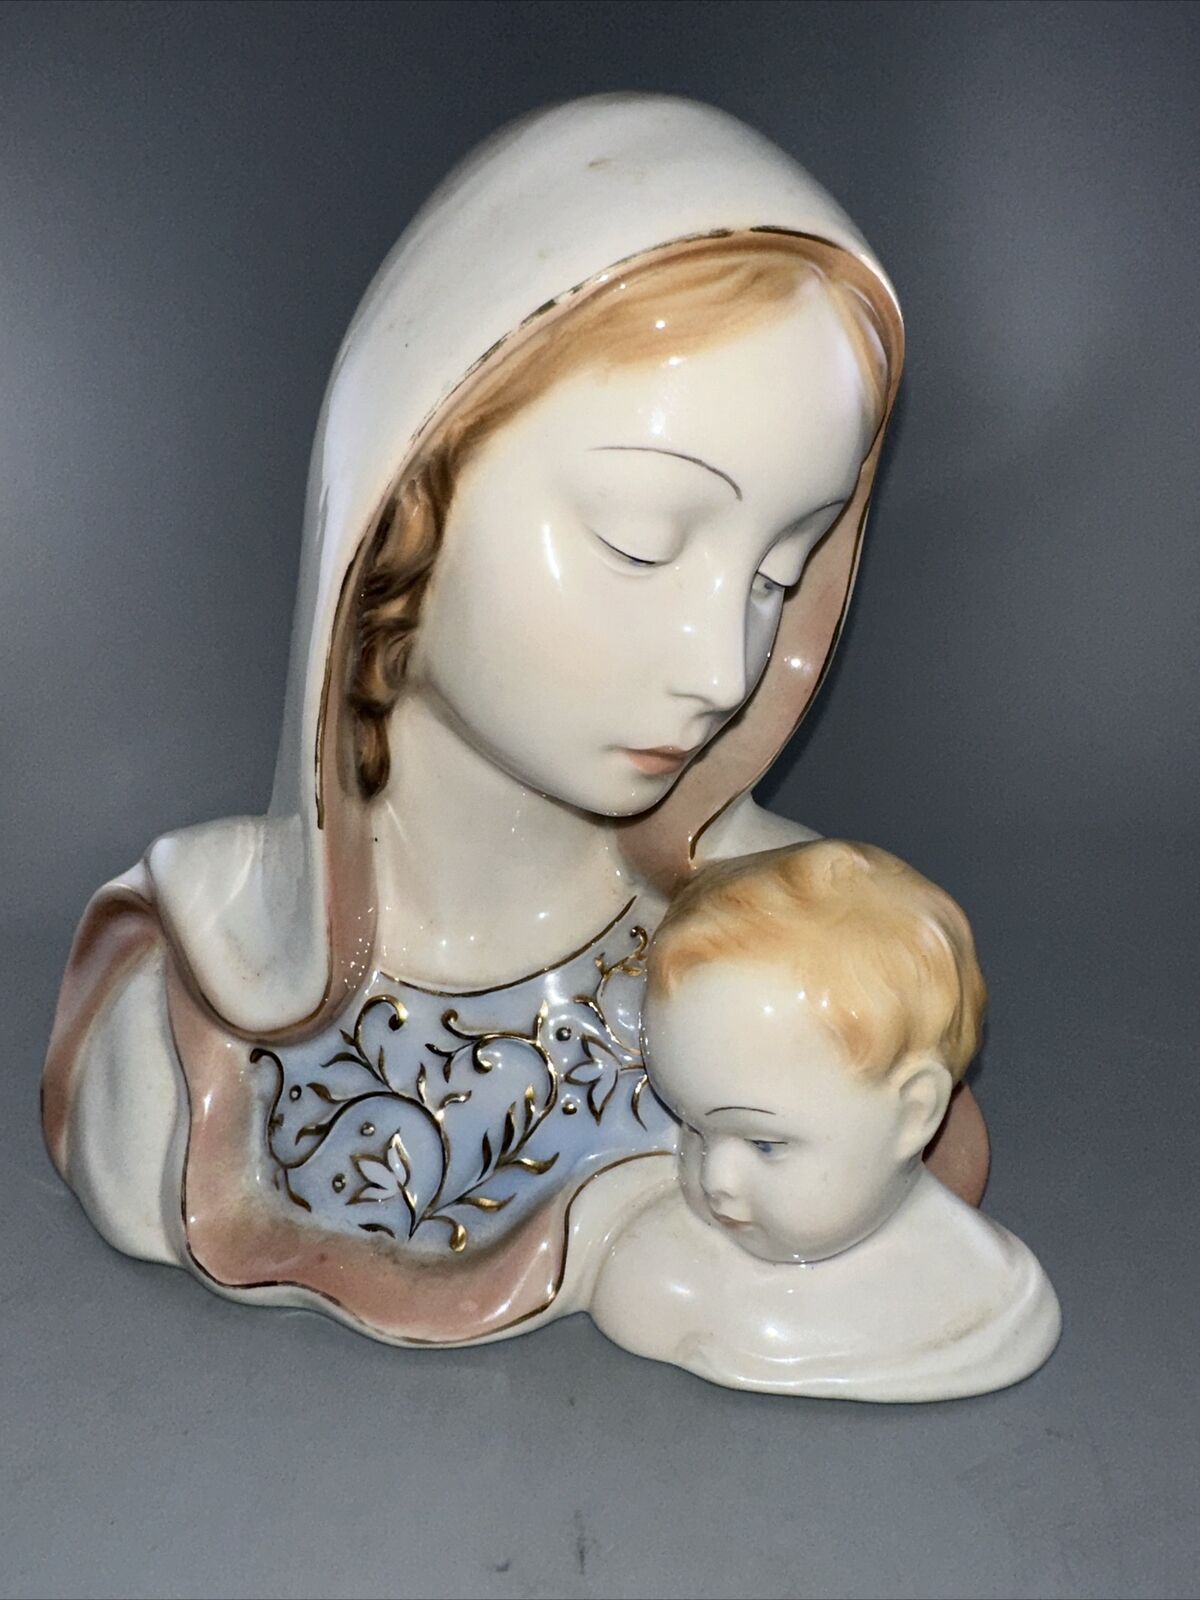 Vintage Ceramic Madonna Virgin Mary Jesus Stunning Condition 8” By 8” Numbered